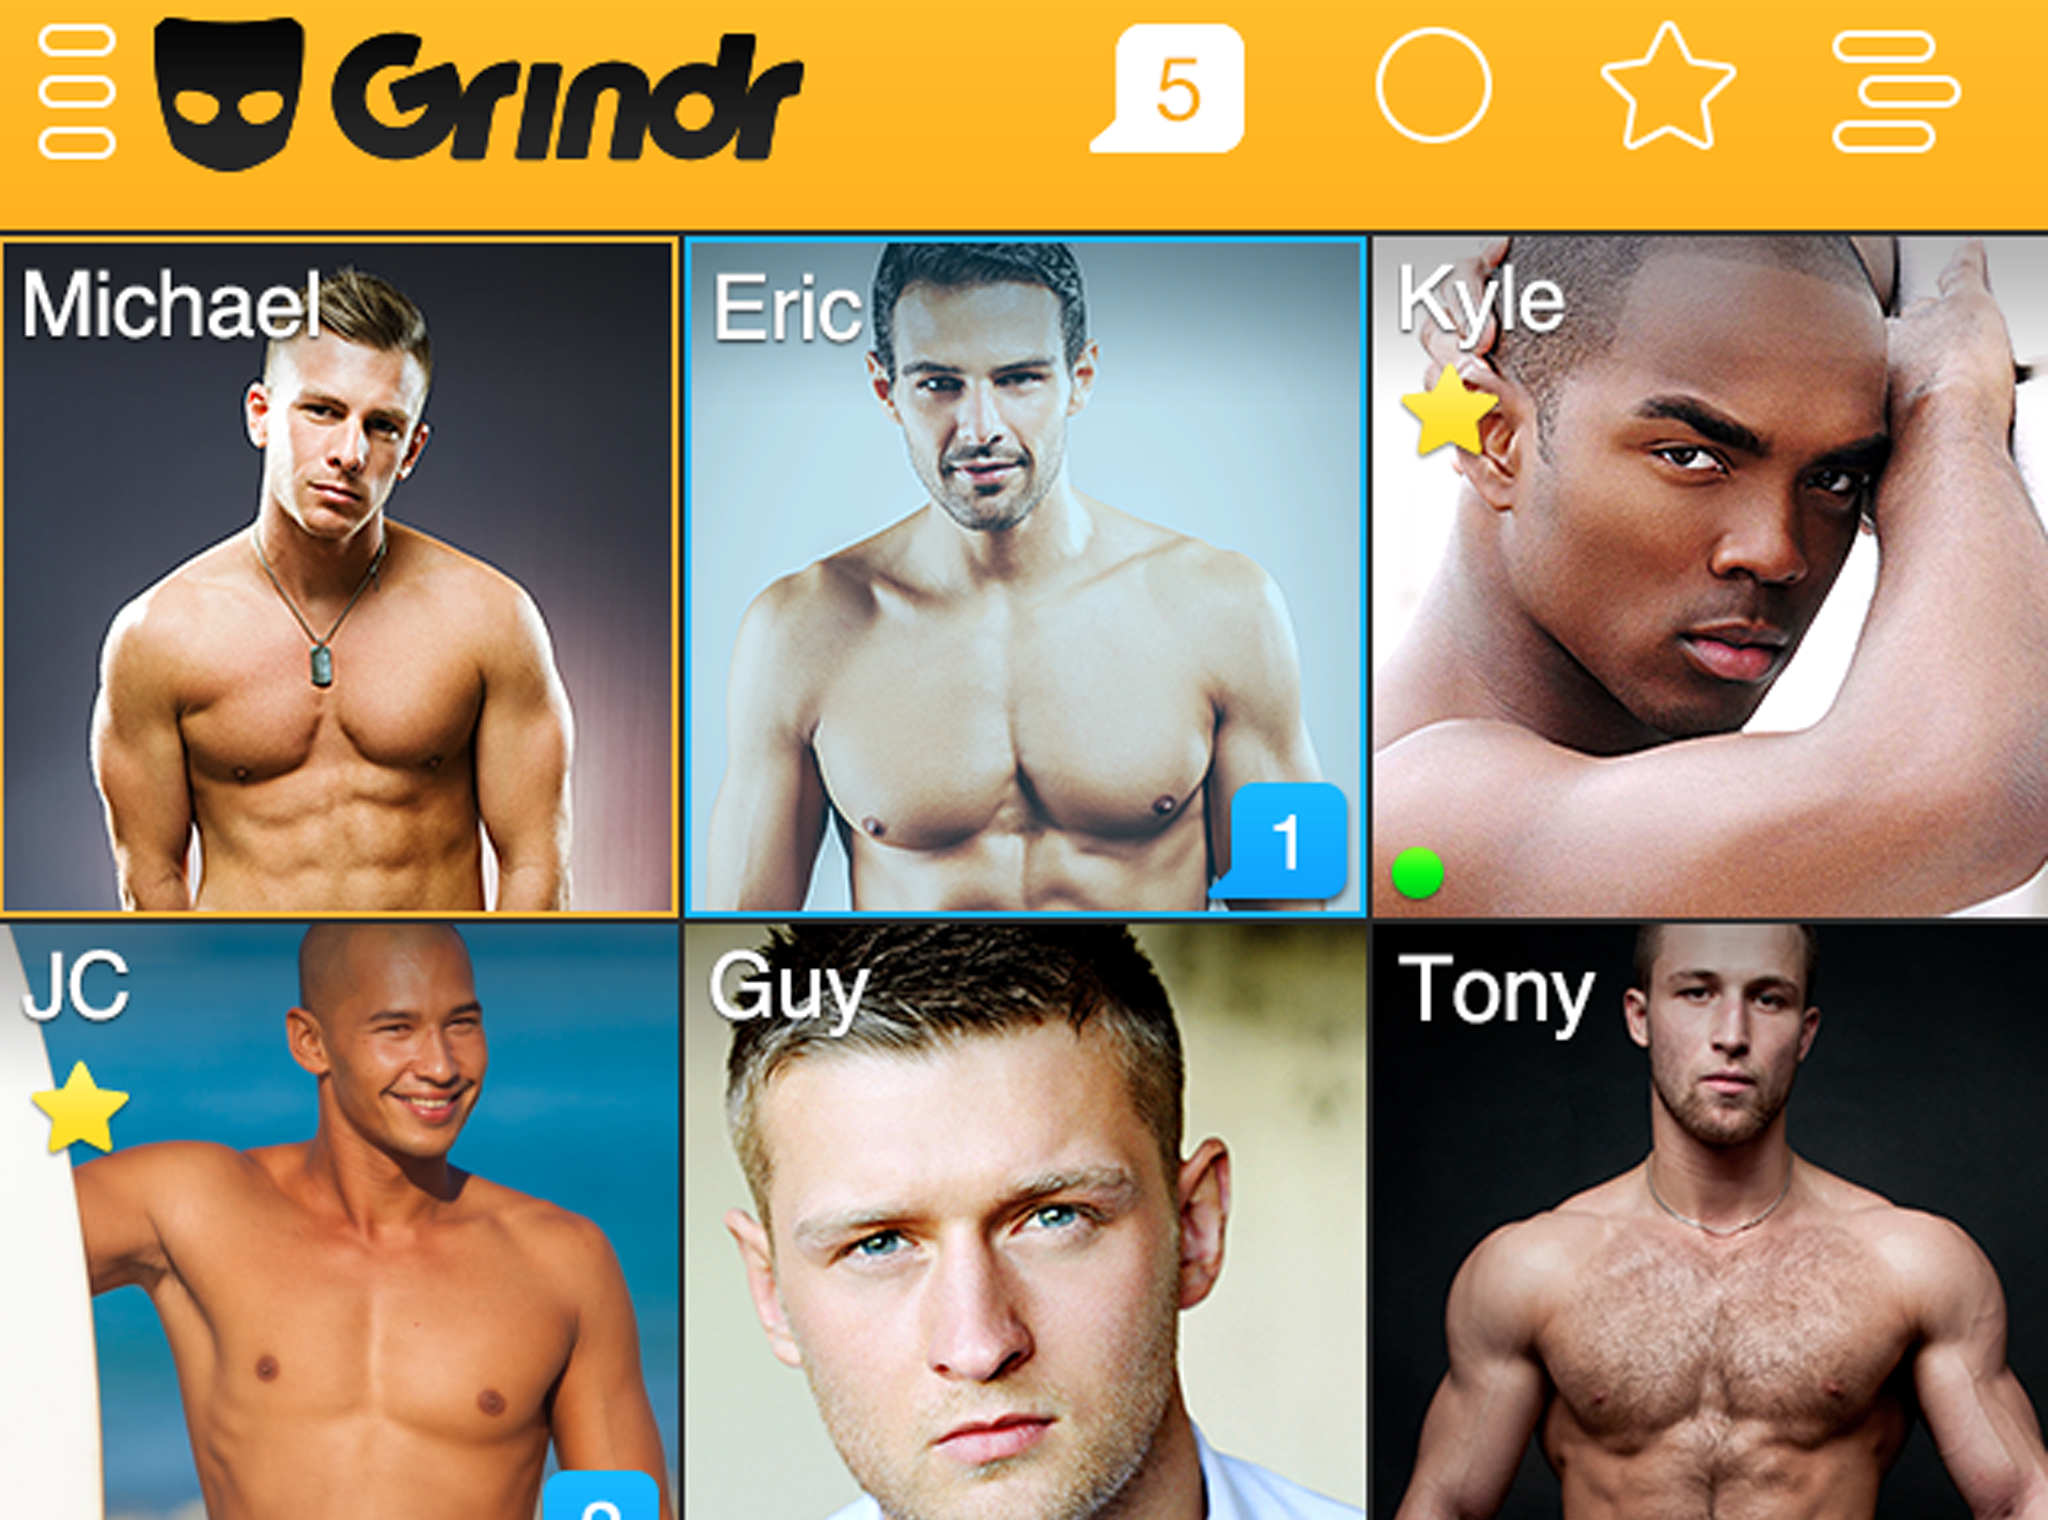 Grindr have warned users to be extremely careful